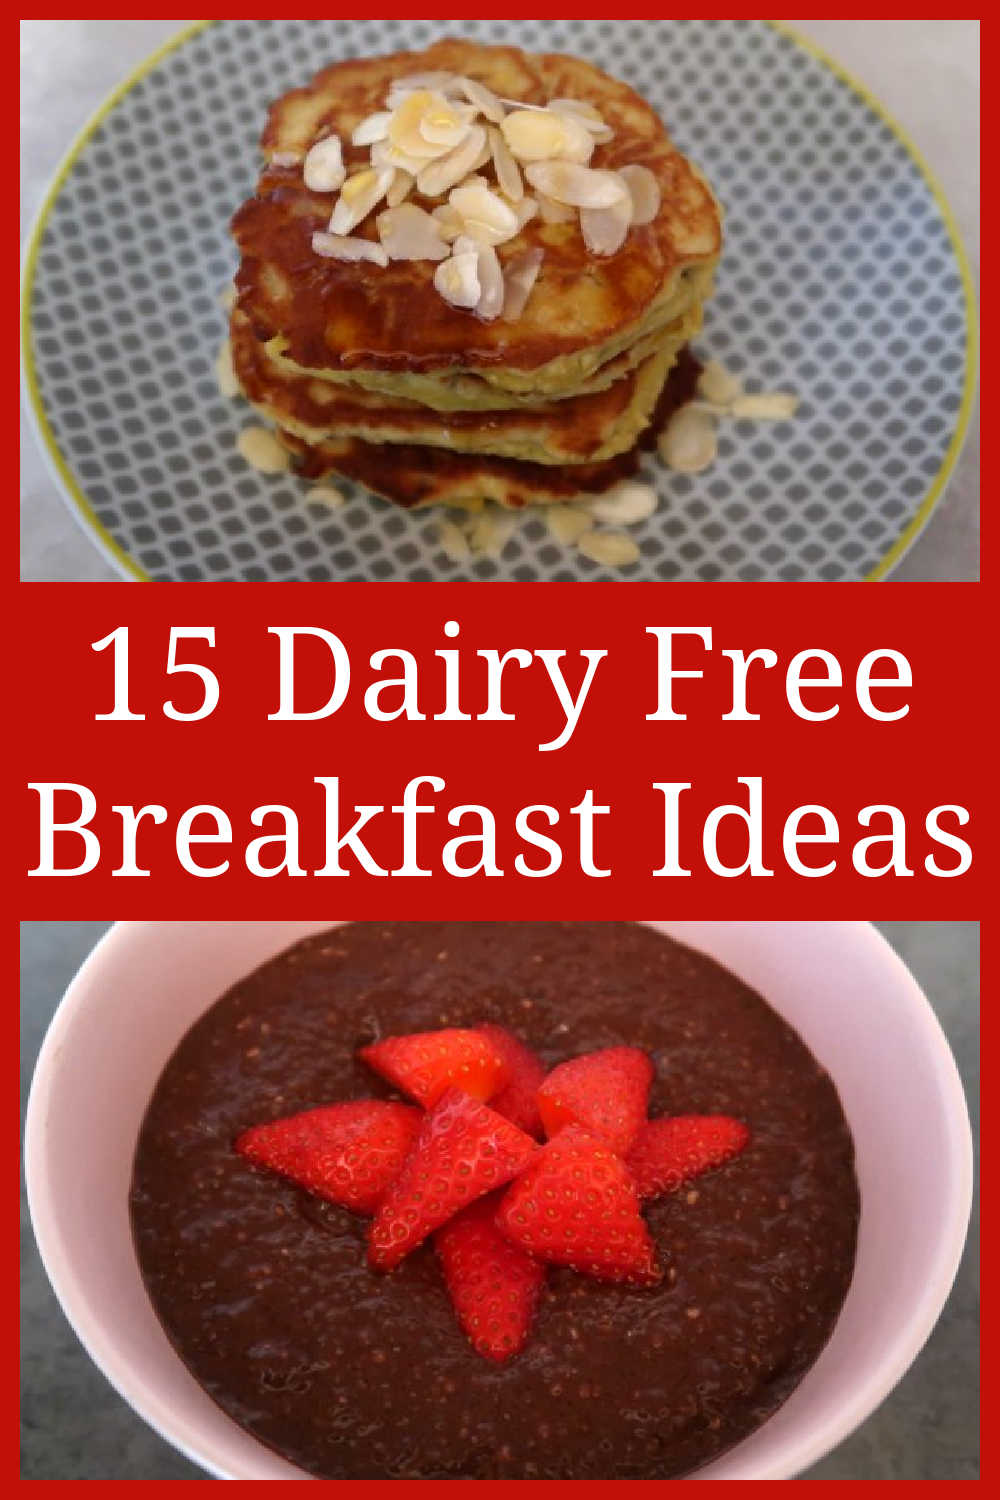 Dairy Free Breakfast Ideas - 15 delicious easy breakfasts - dairy-free high-protein healthy recipes for busy mornings.